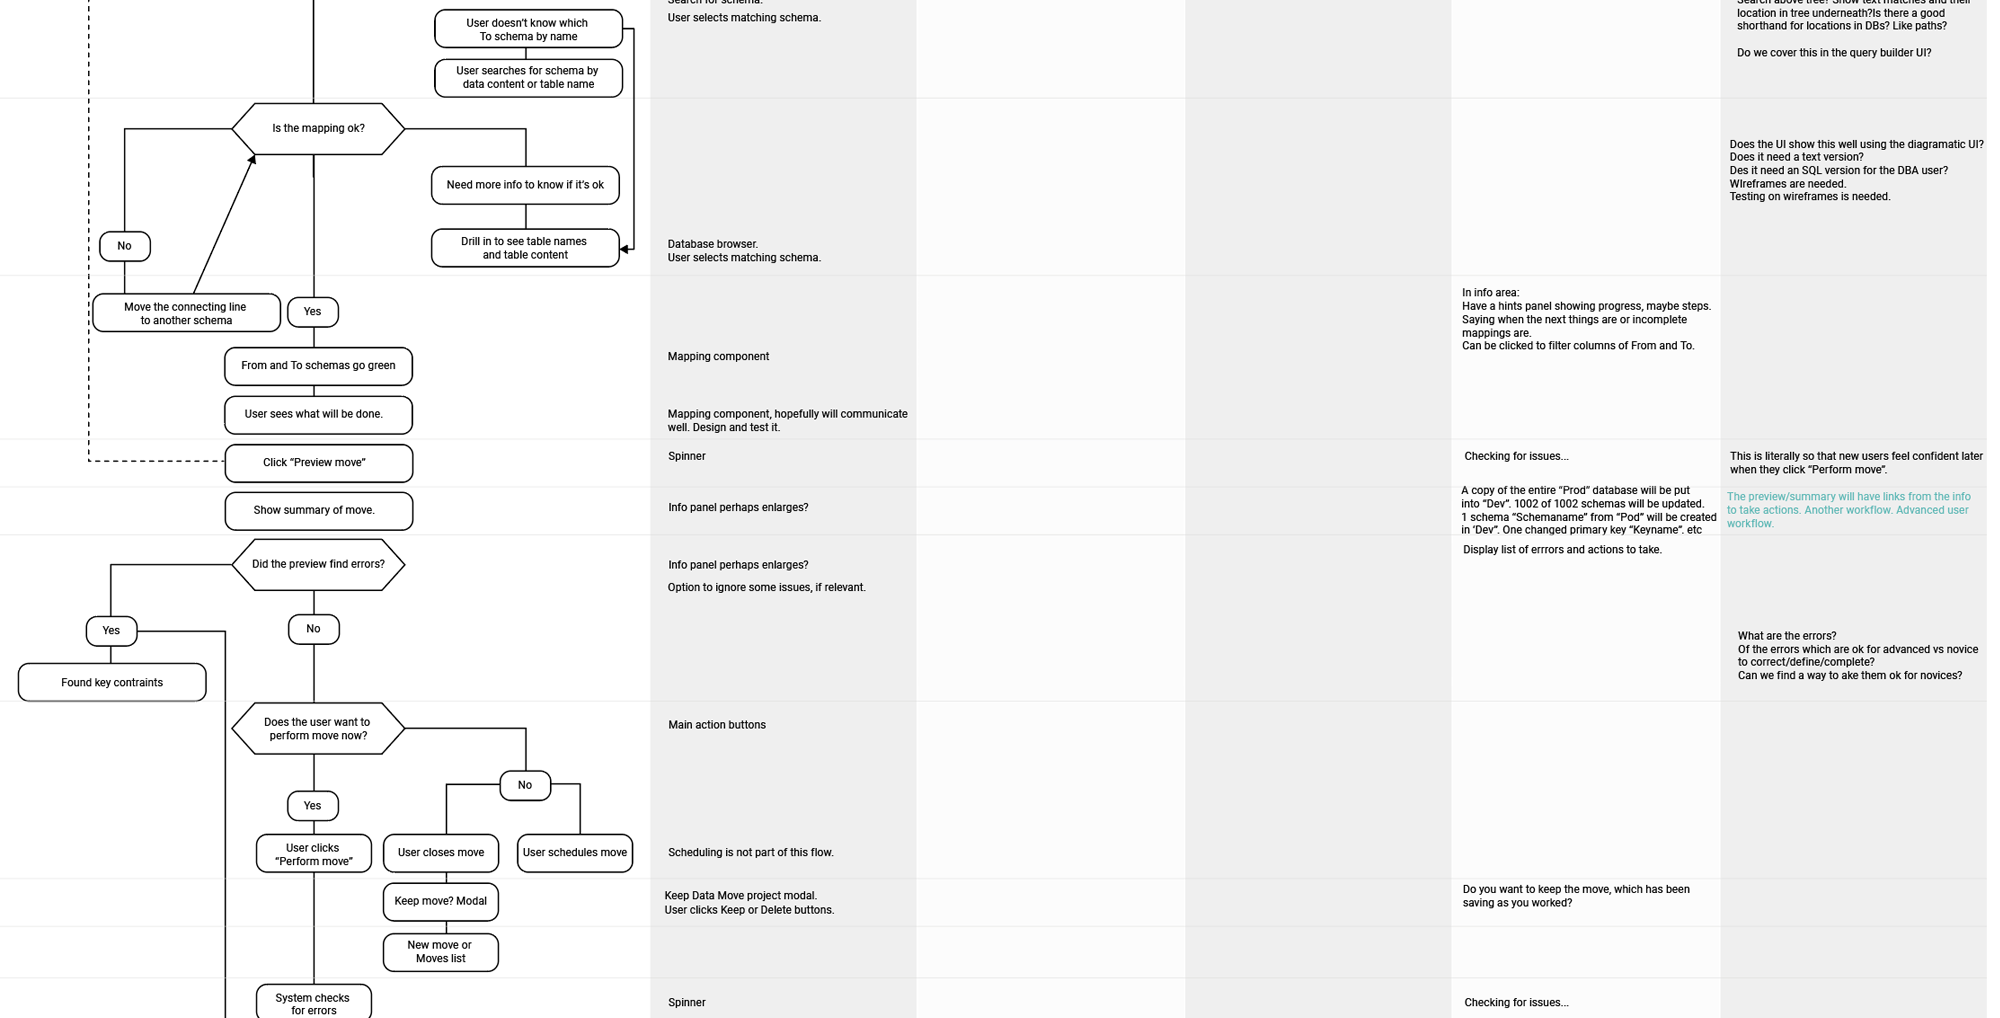 A screen grab of a workflow diagram.